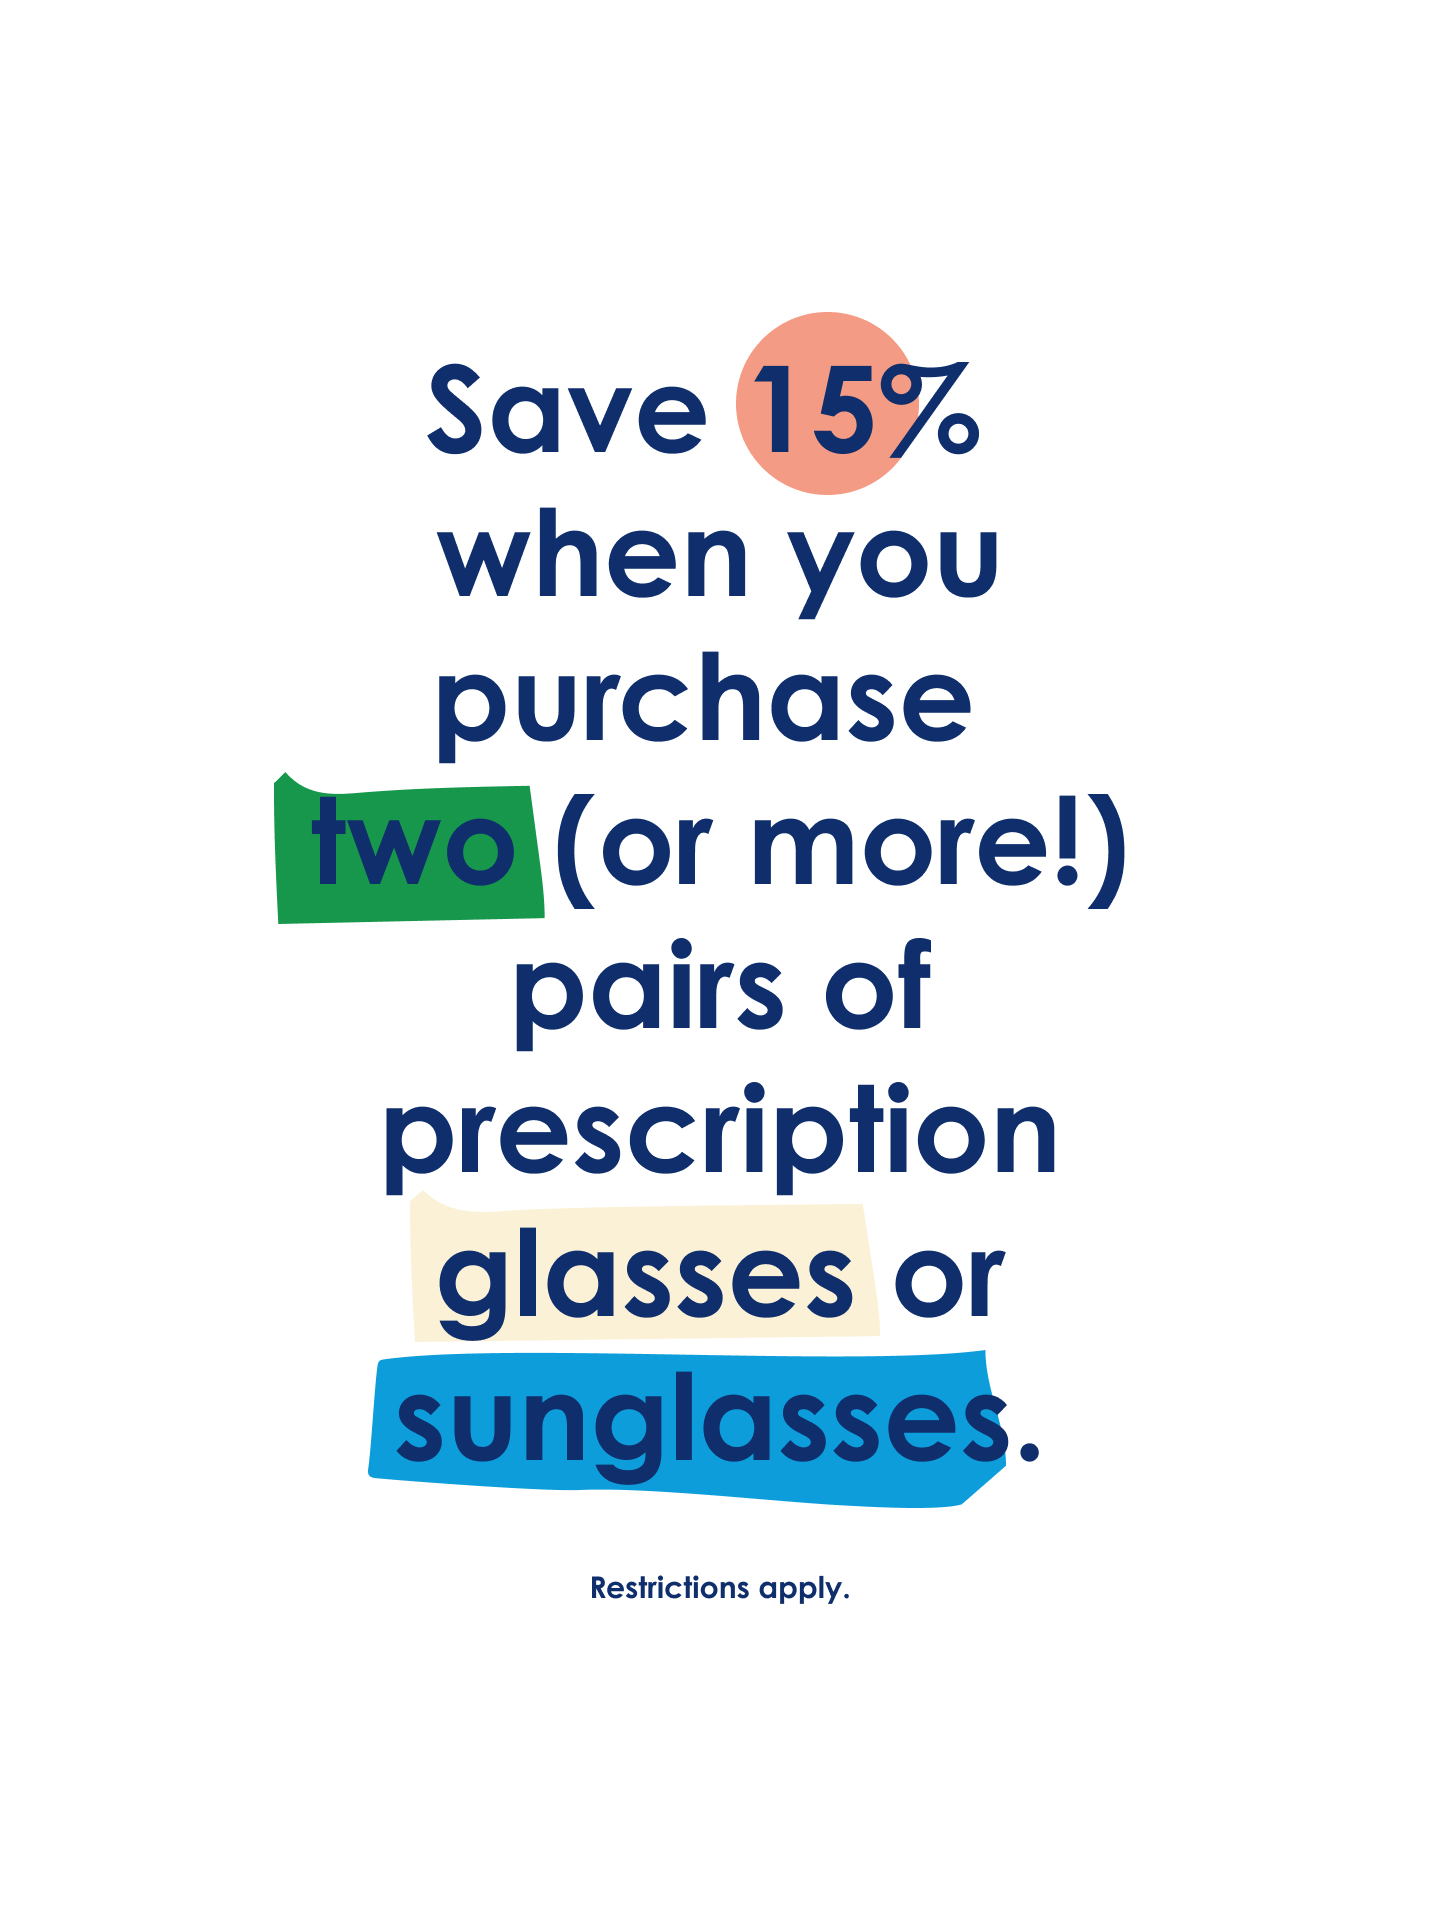 Save 15% when you purchase two (or more!) pairs of prescription glasses or sunglasses. Restrictions apply.